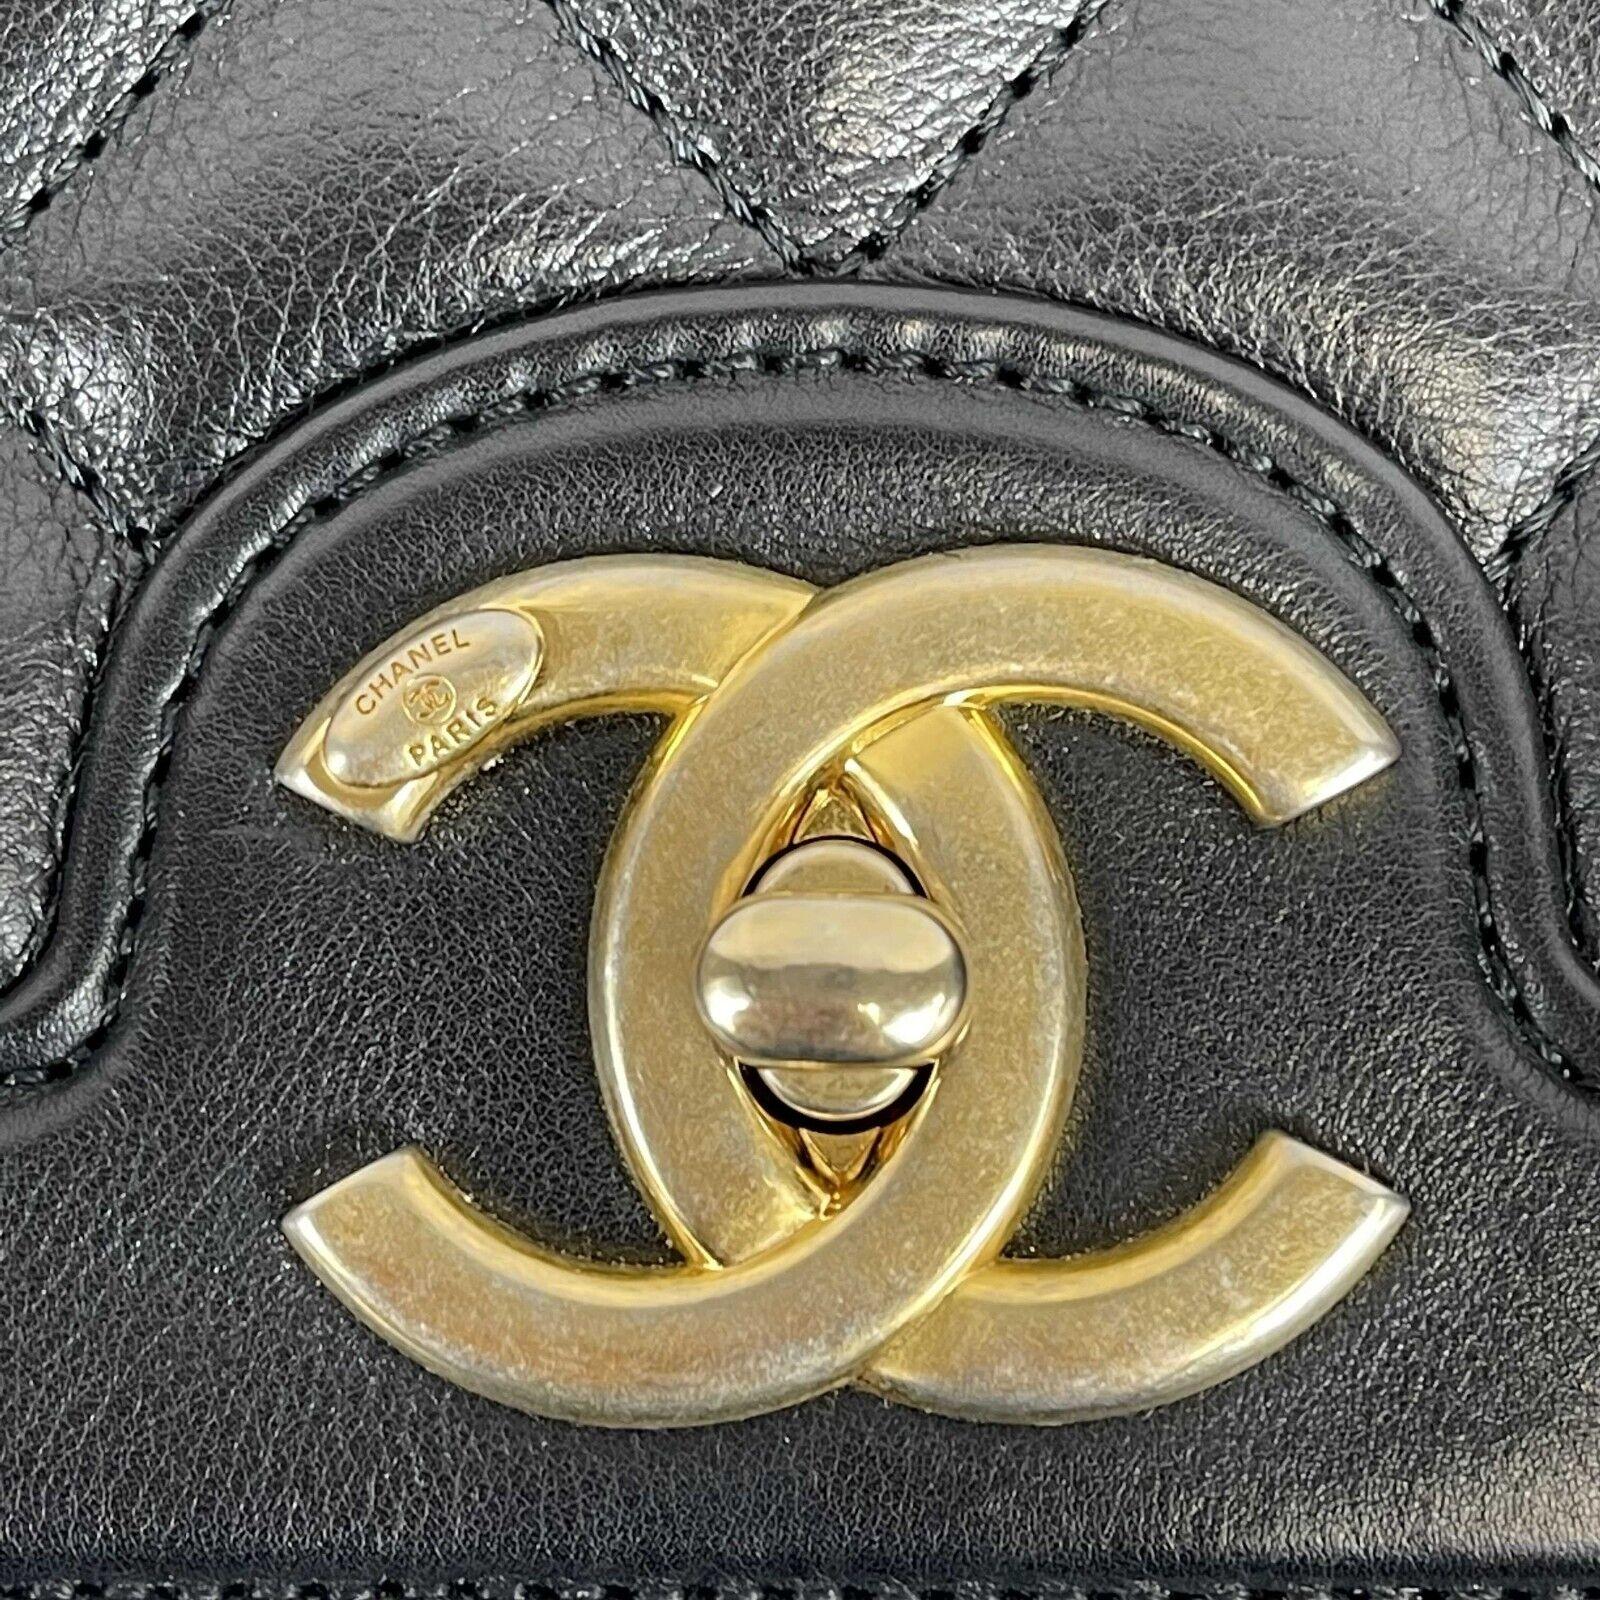 CHANEL - Chain Link CC Black Lambskin Full Flap Bag Quilted Medium Shoulder Bag
Measurements

Width: 11 in / 27.94 cm
Height: 7 in / 17.78 cm
Depth: 3 in / 7.62 cm
Strap Drop: 20-22.5 in / 50.8 cm
Details

Made In: France
Color: Black
Accessories: